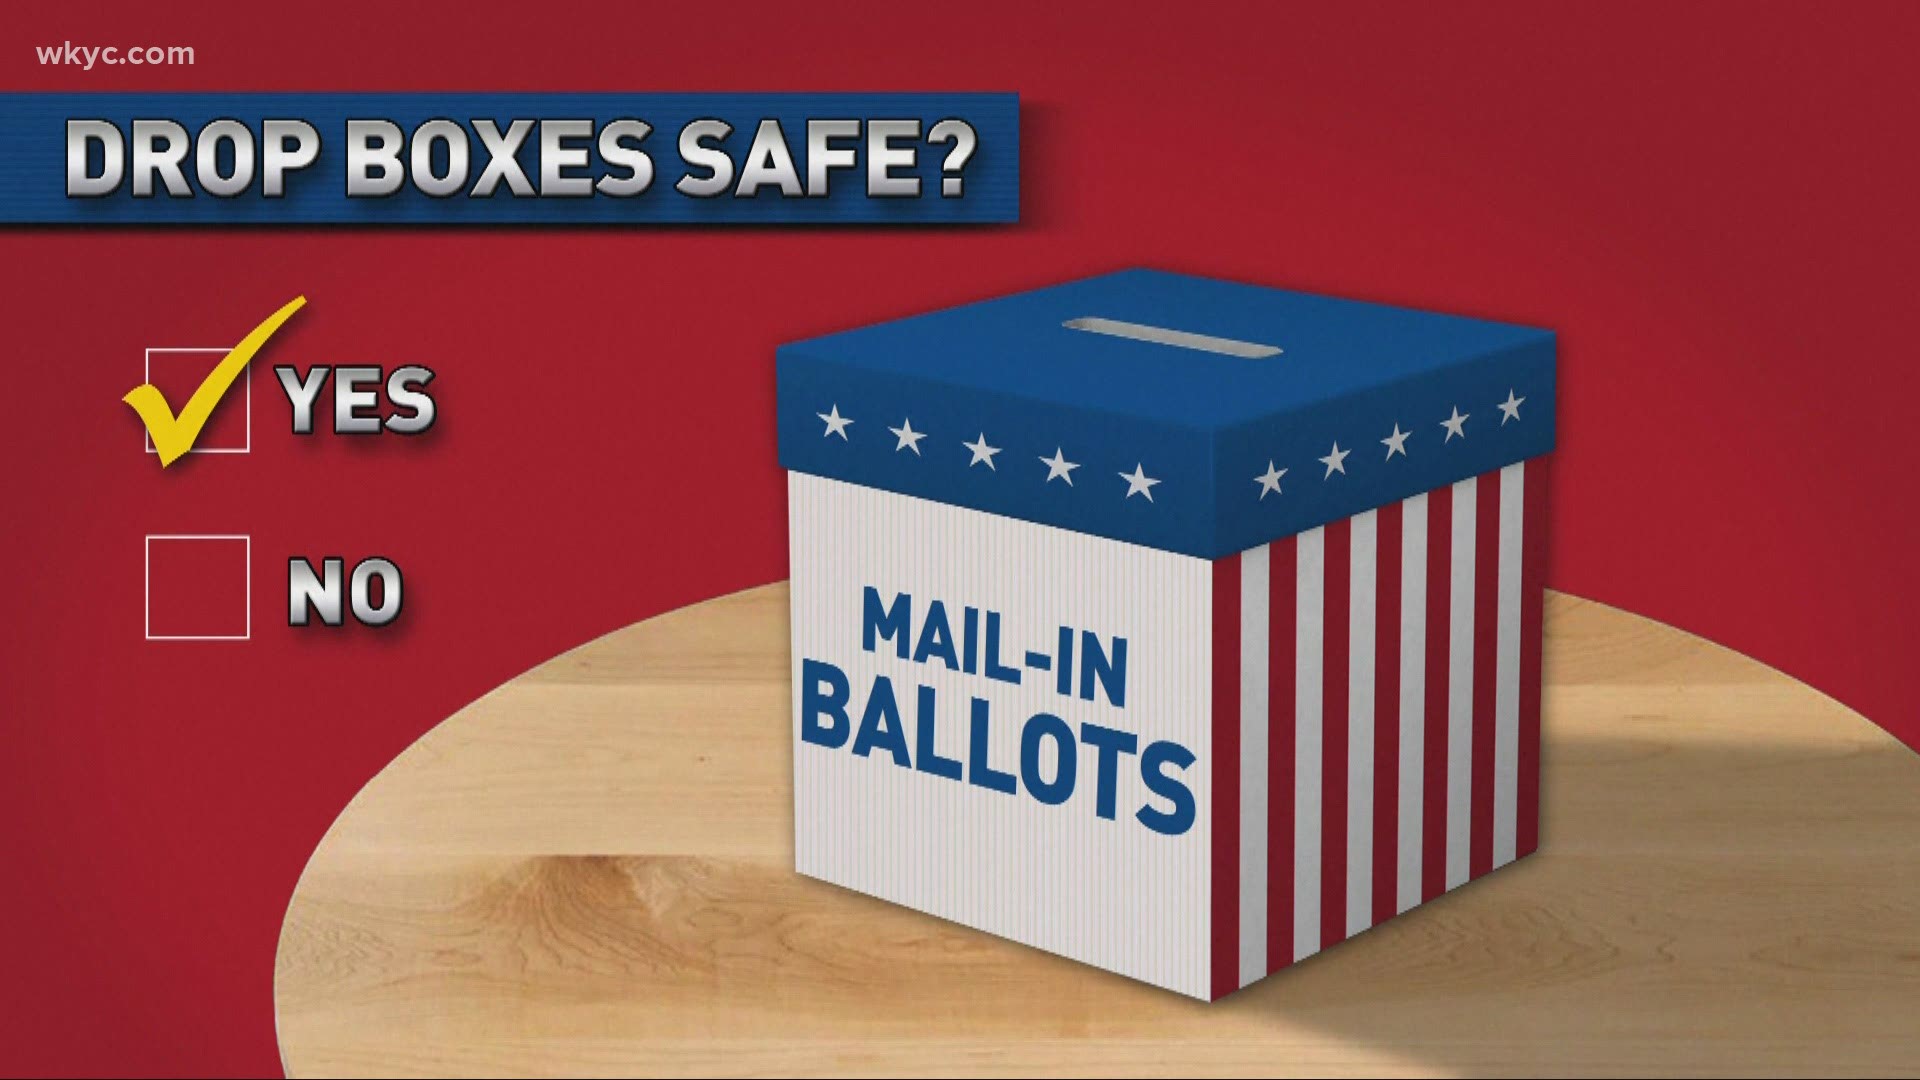 Oct. 9, 2020: With Ohio voters already casting their ballots weeks ahead of the November election, here are important things you need to know. Have you voted yet?